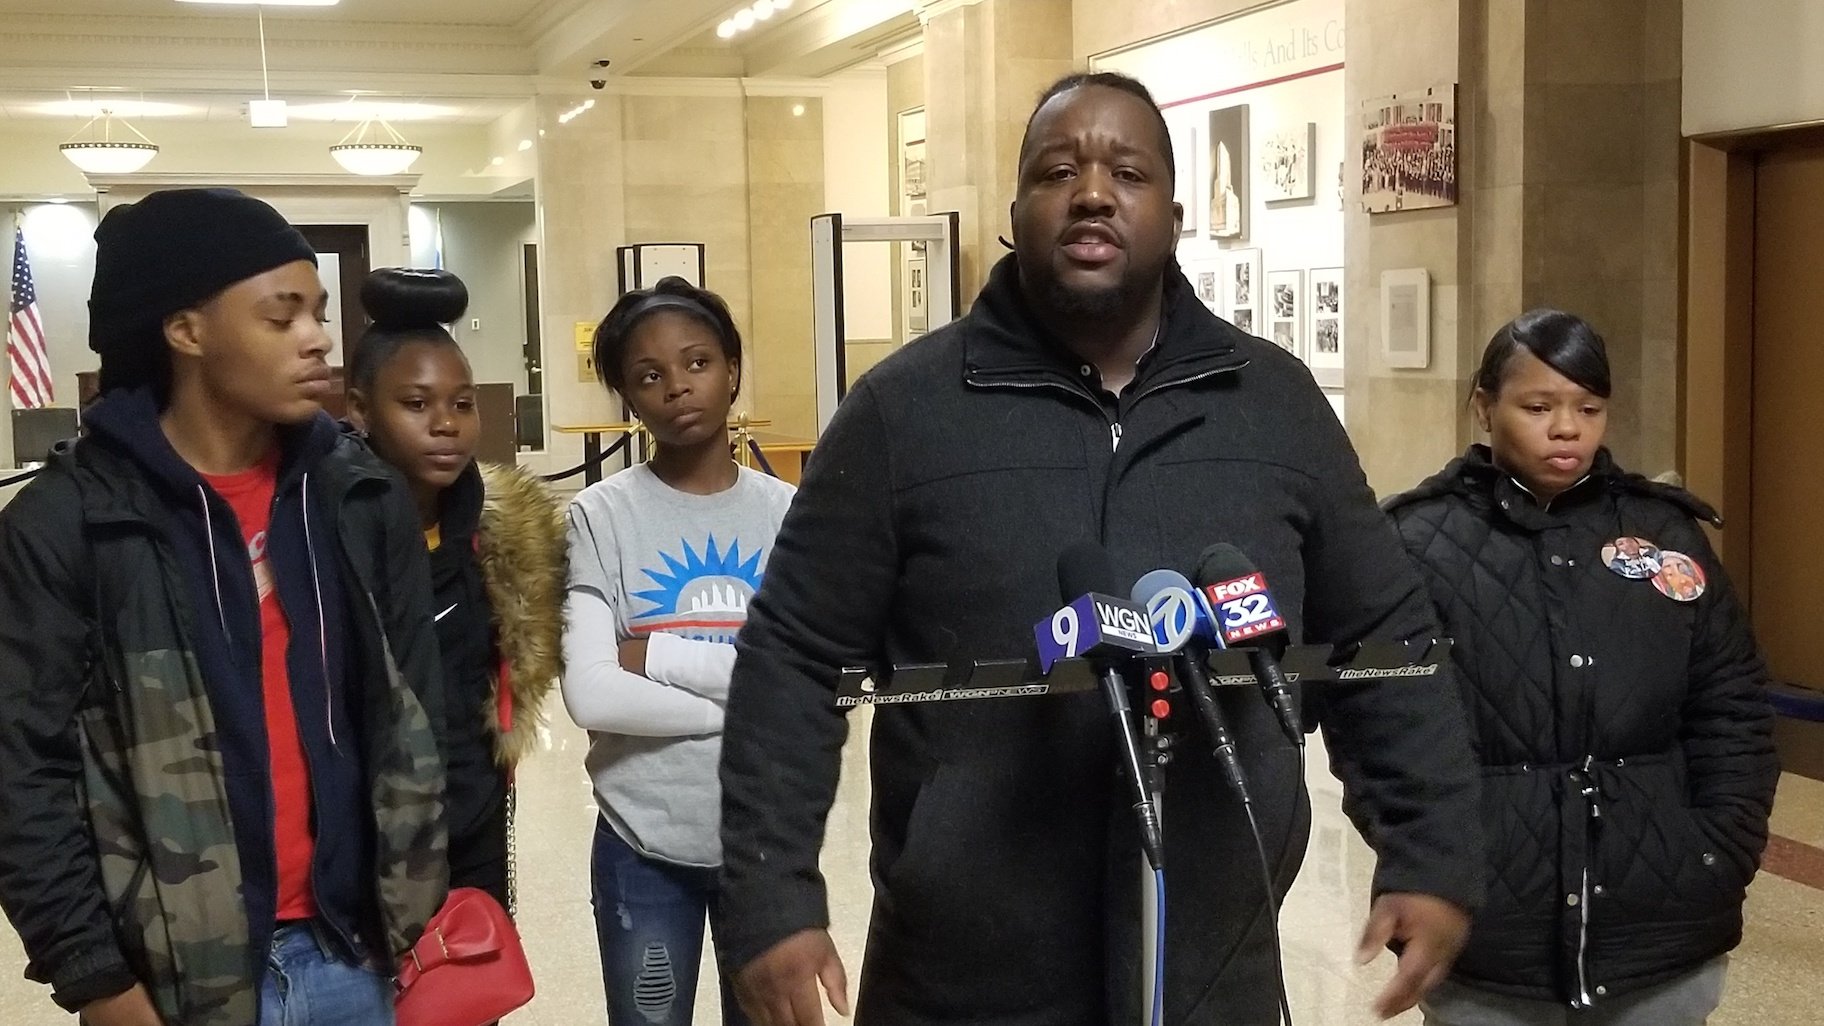 Martinez Sutton, center, speaks at City Hall on Thursday, Nov. 14, 2019 about the killing of his sister Rekia Boyd by former Chicago police Detective Dante Servin in 2012. (Matt Masterson / WTTW News)